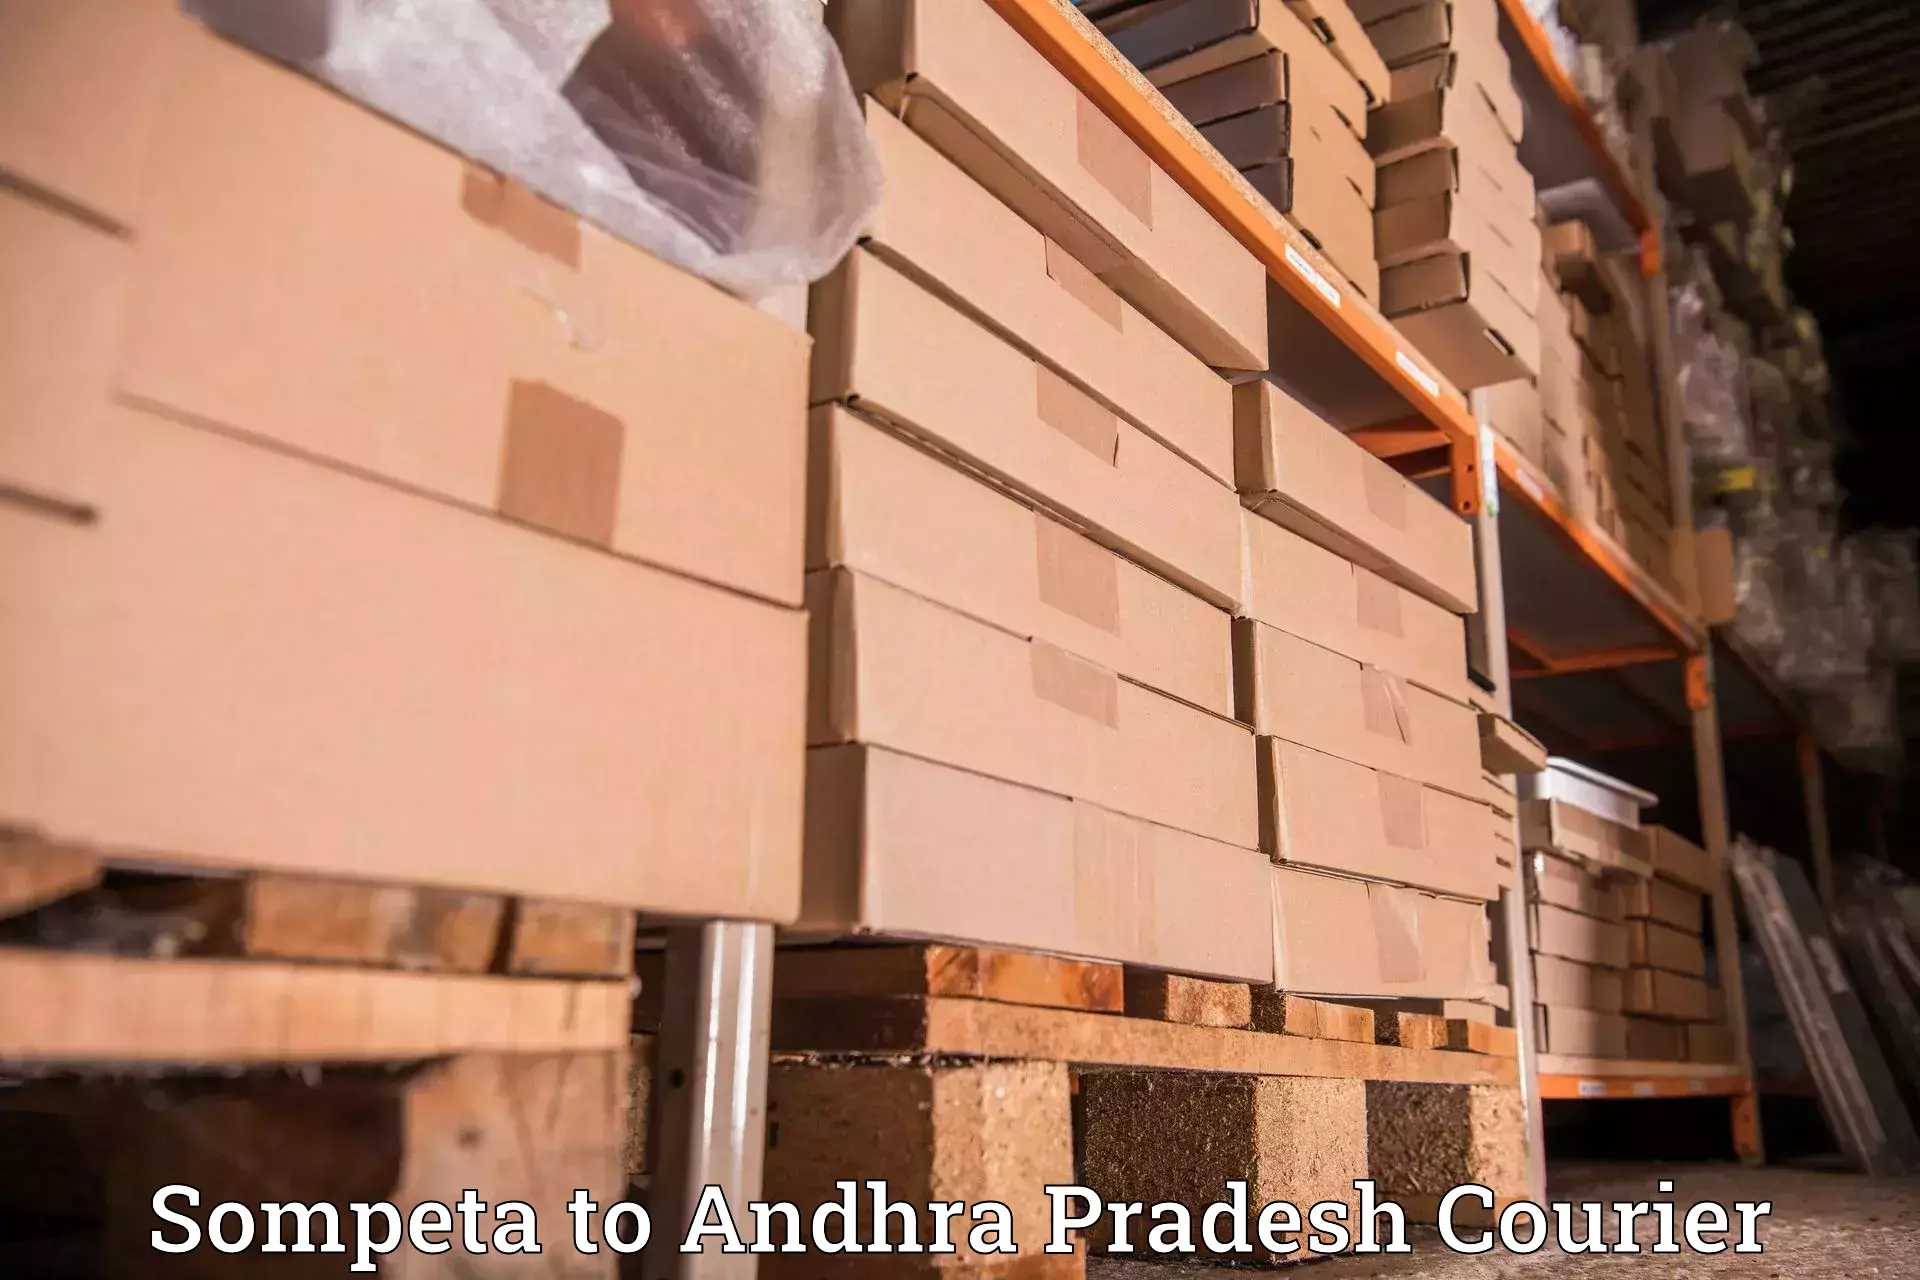 Customer-oriented courier services Sompeta to Chodavaram